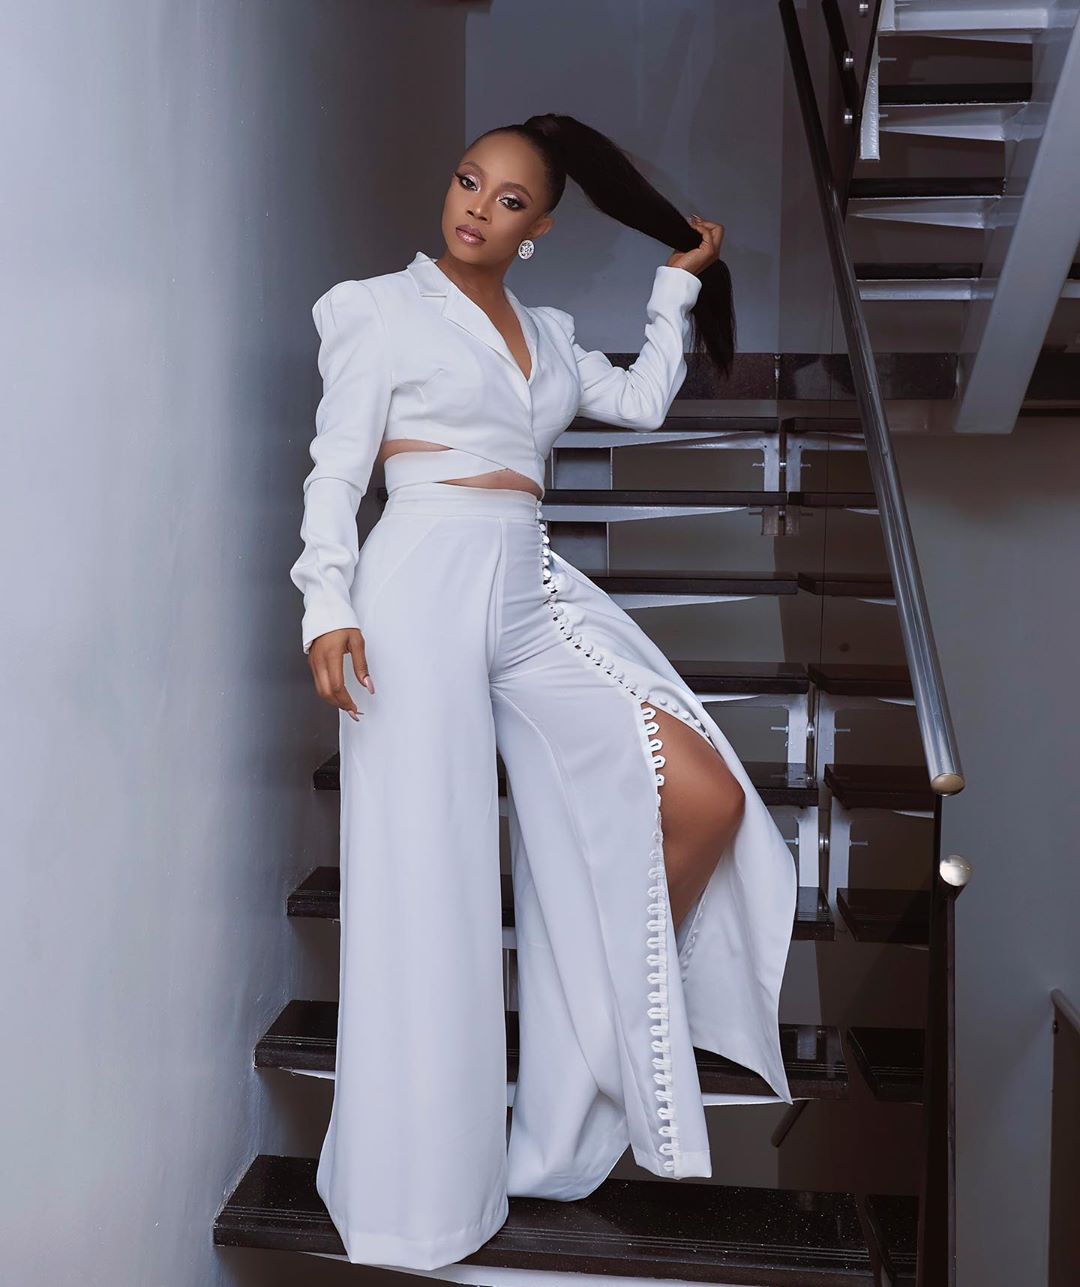 toke-makinwa-style-temple-all-white-outfit